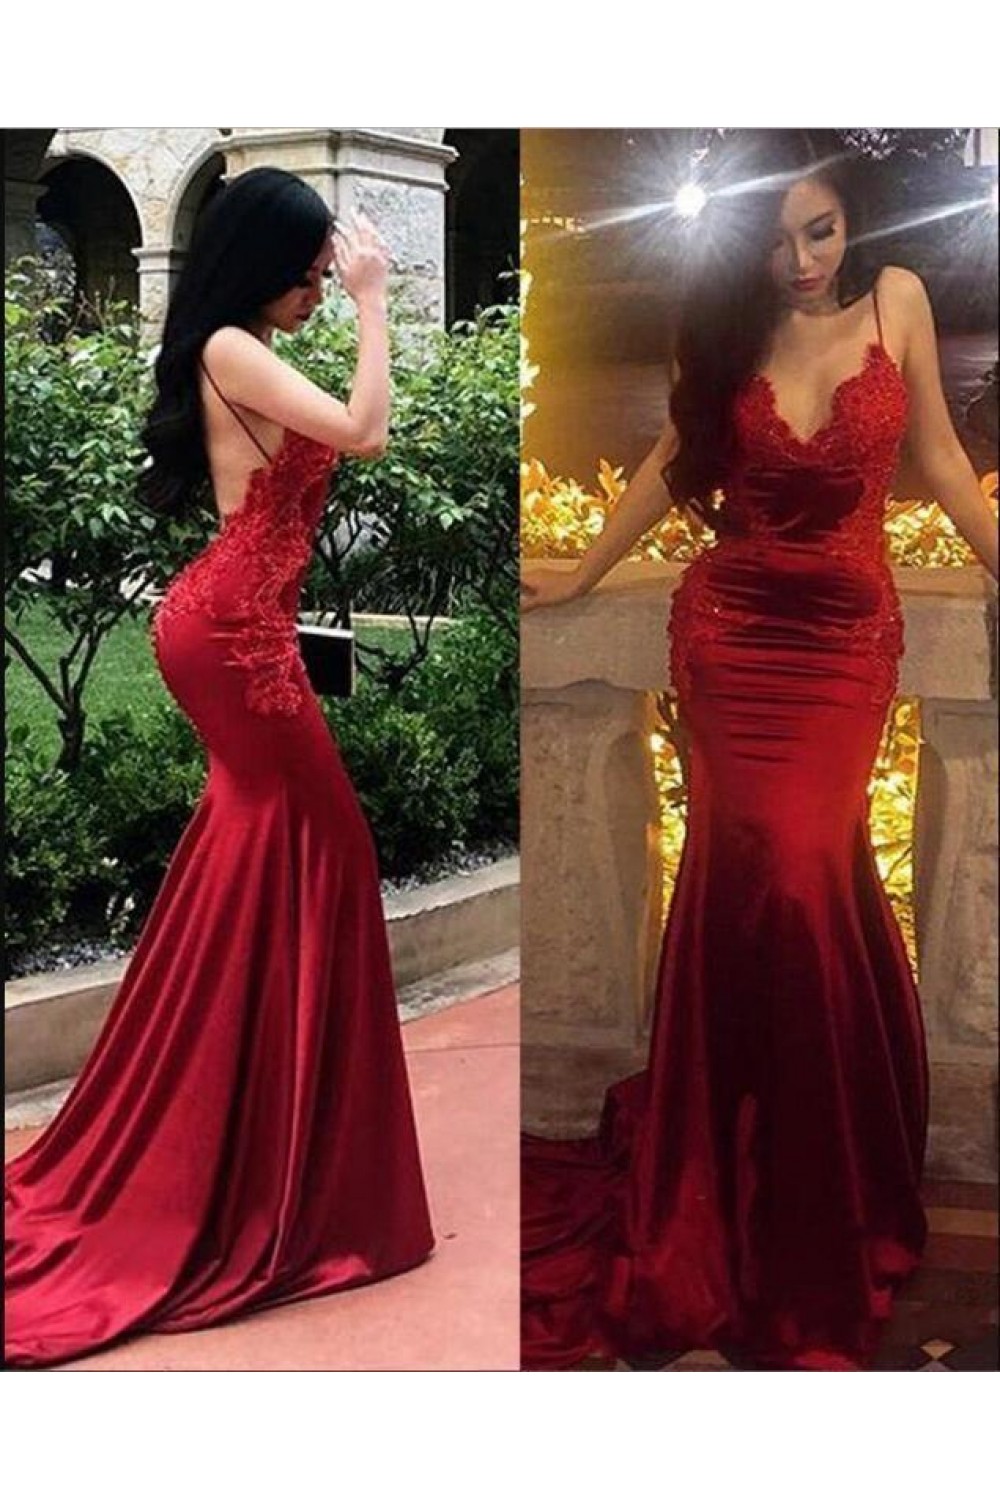 Sexy Mermaid V-Neck Lace Long Prom Dress Formal Evening Dresses 601391